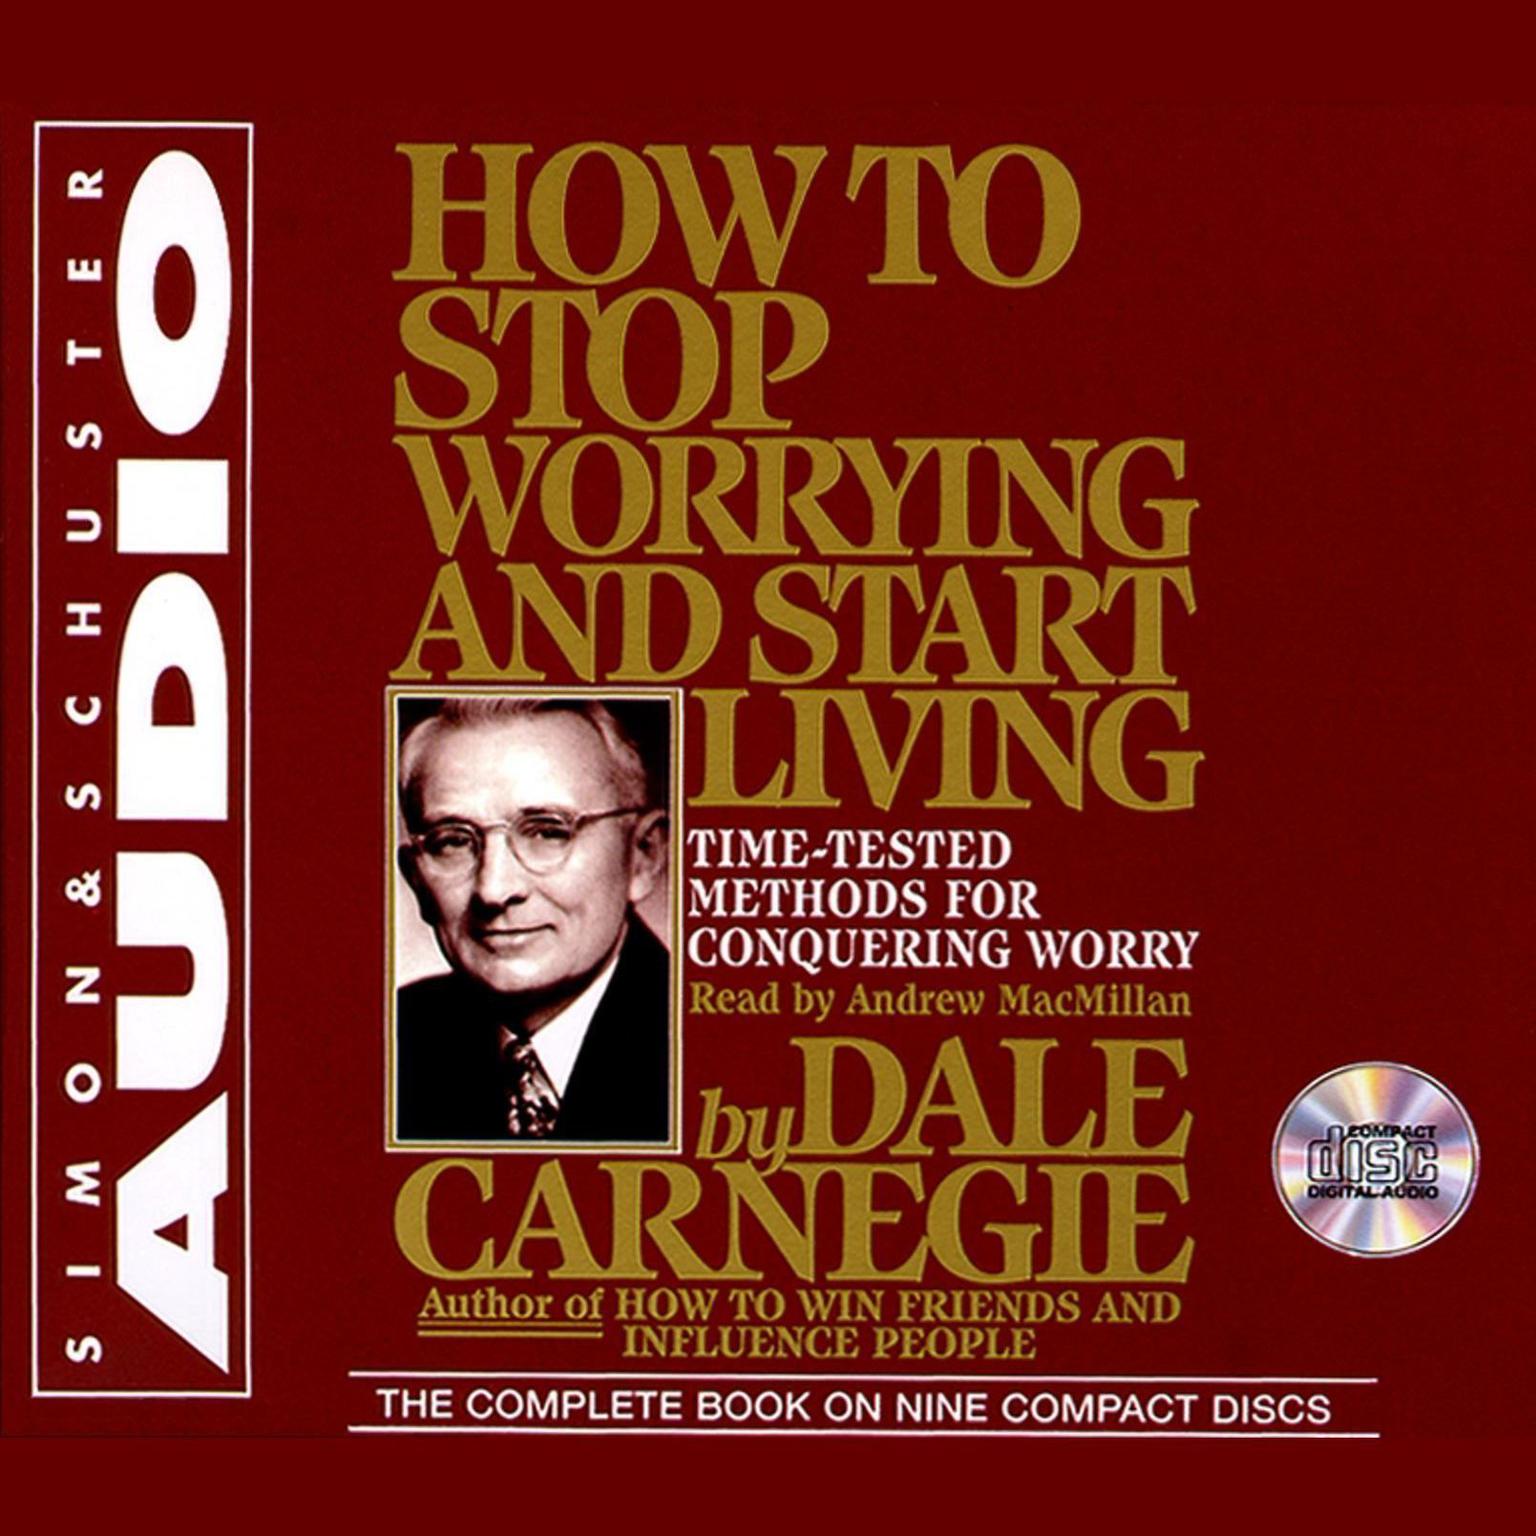 How To Stop Worrying And Start Living: Time-Tested Methods for Conquering Worry Audiobook, by Dale Carnegie 